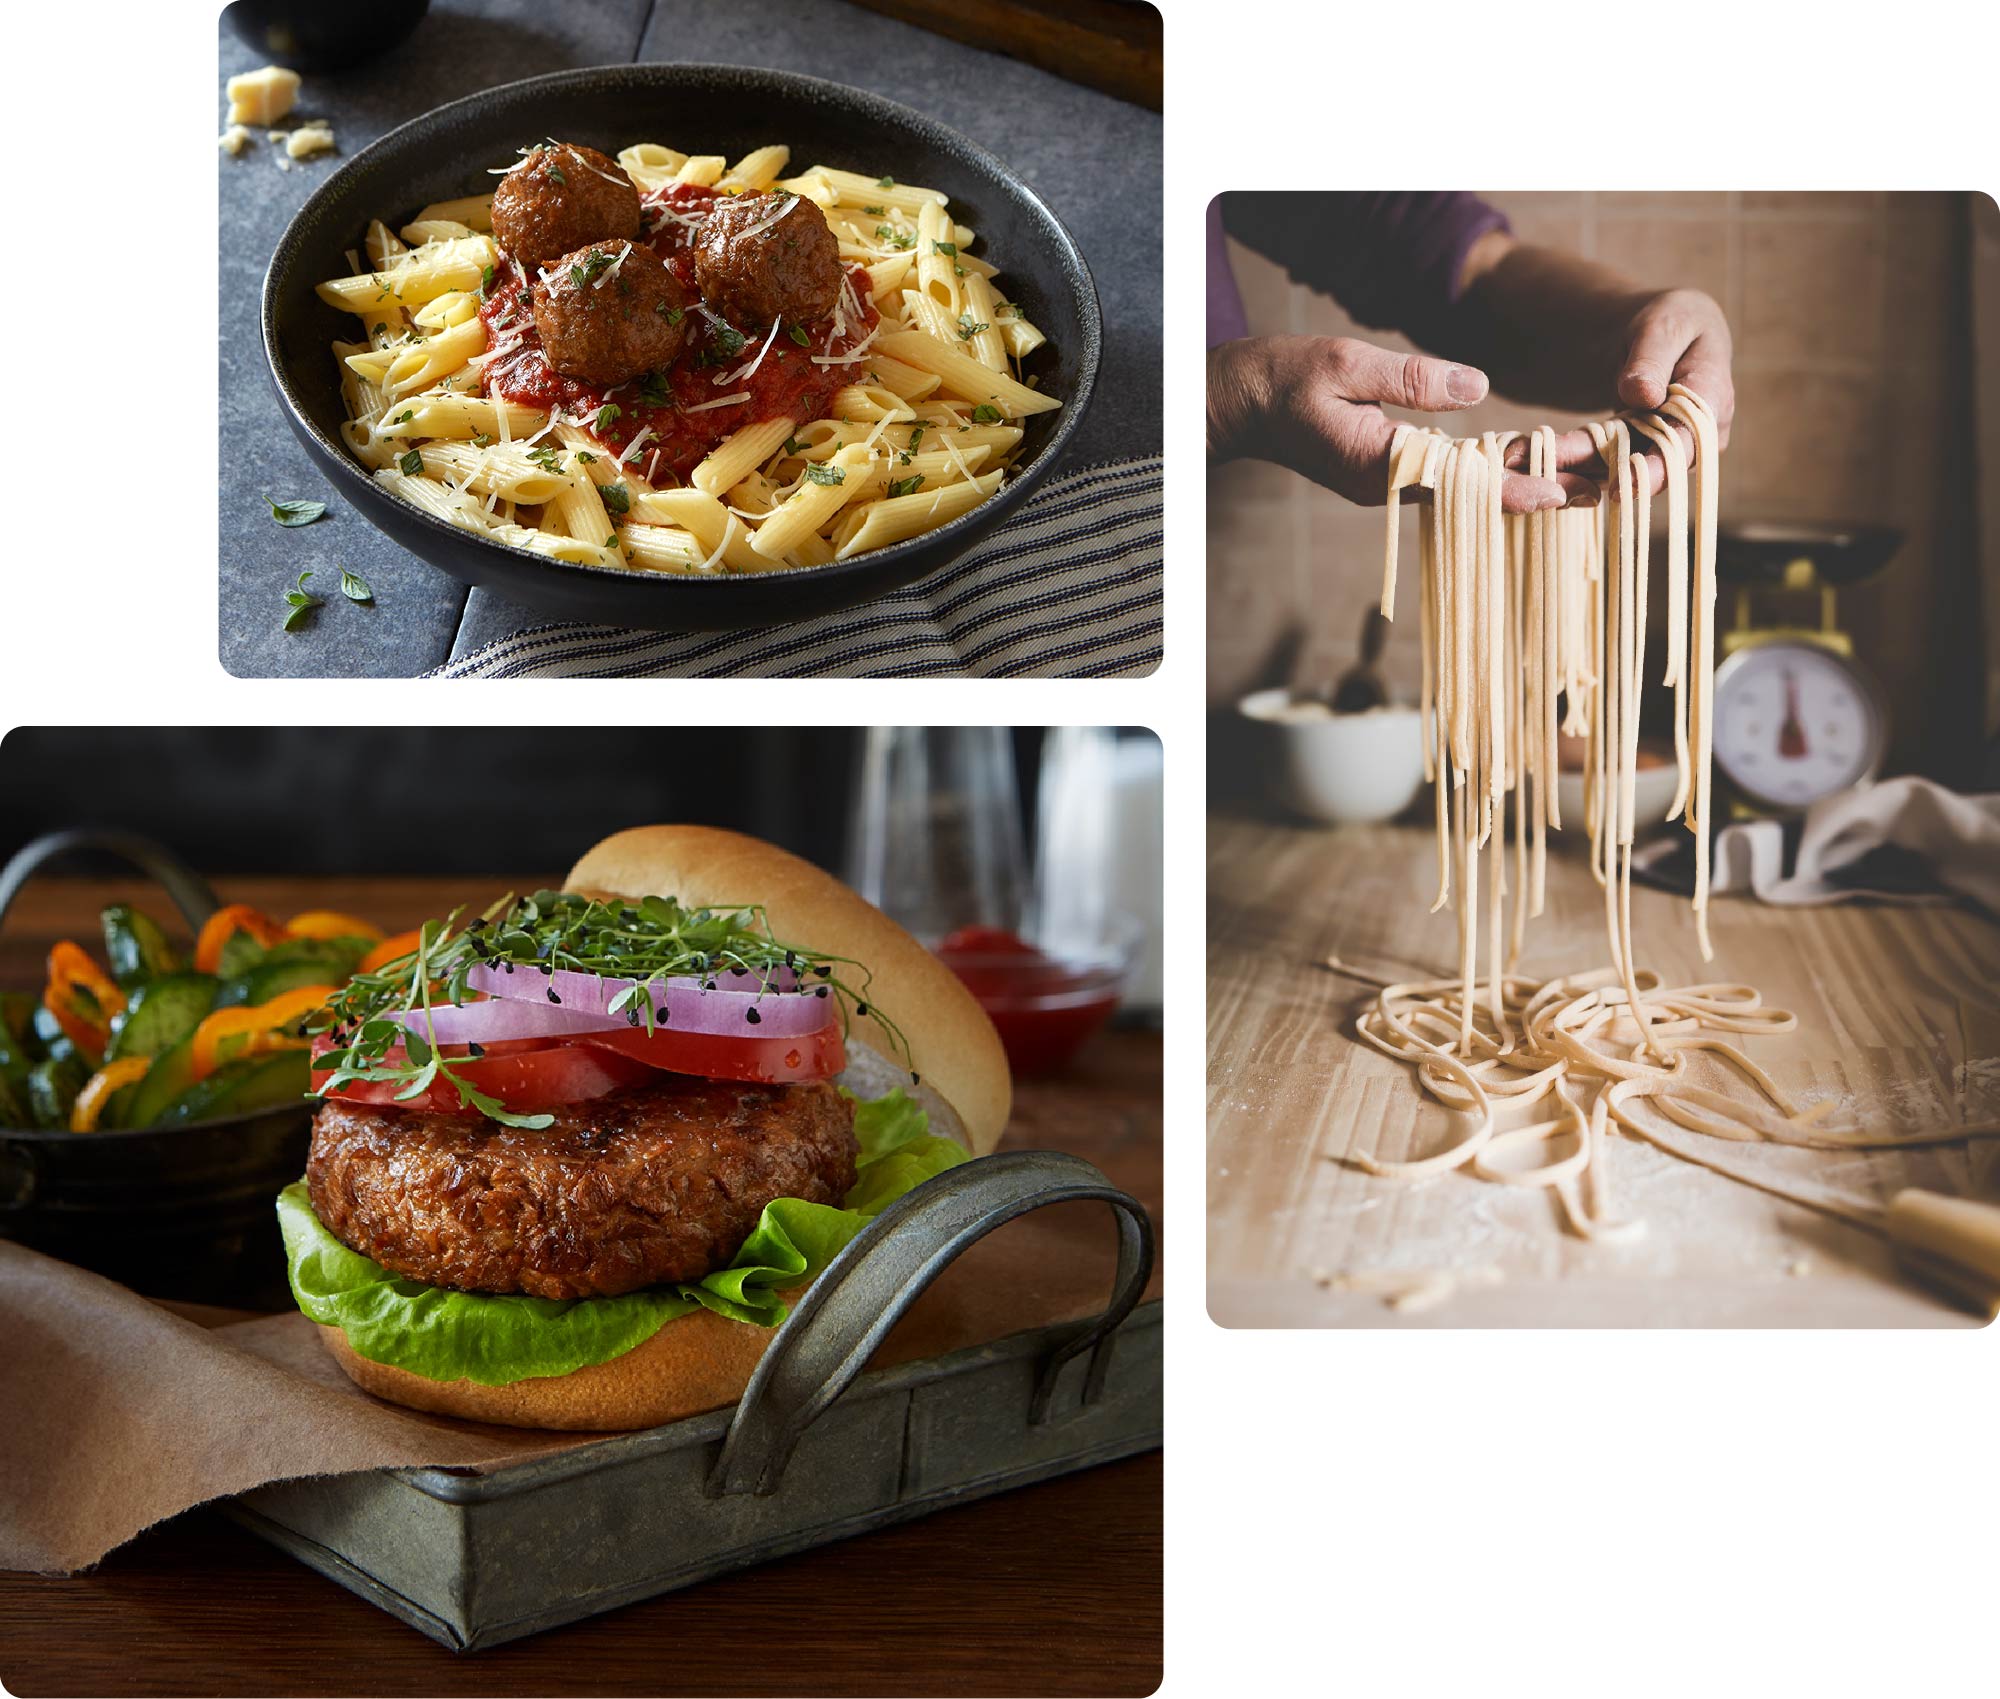 3 photos of food: meatballs and penne noodles, a burger, and dried fettuccine